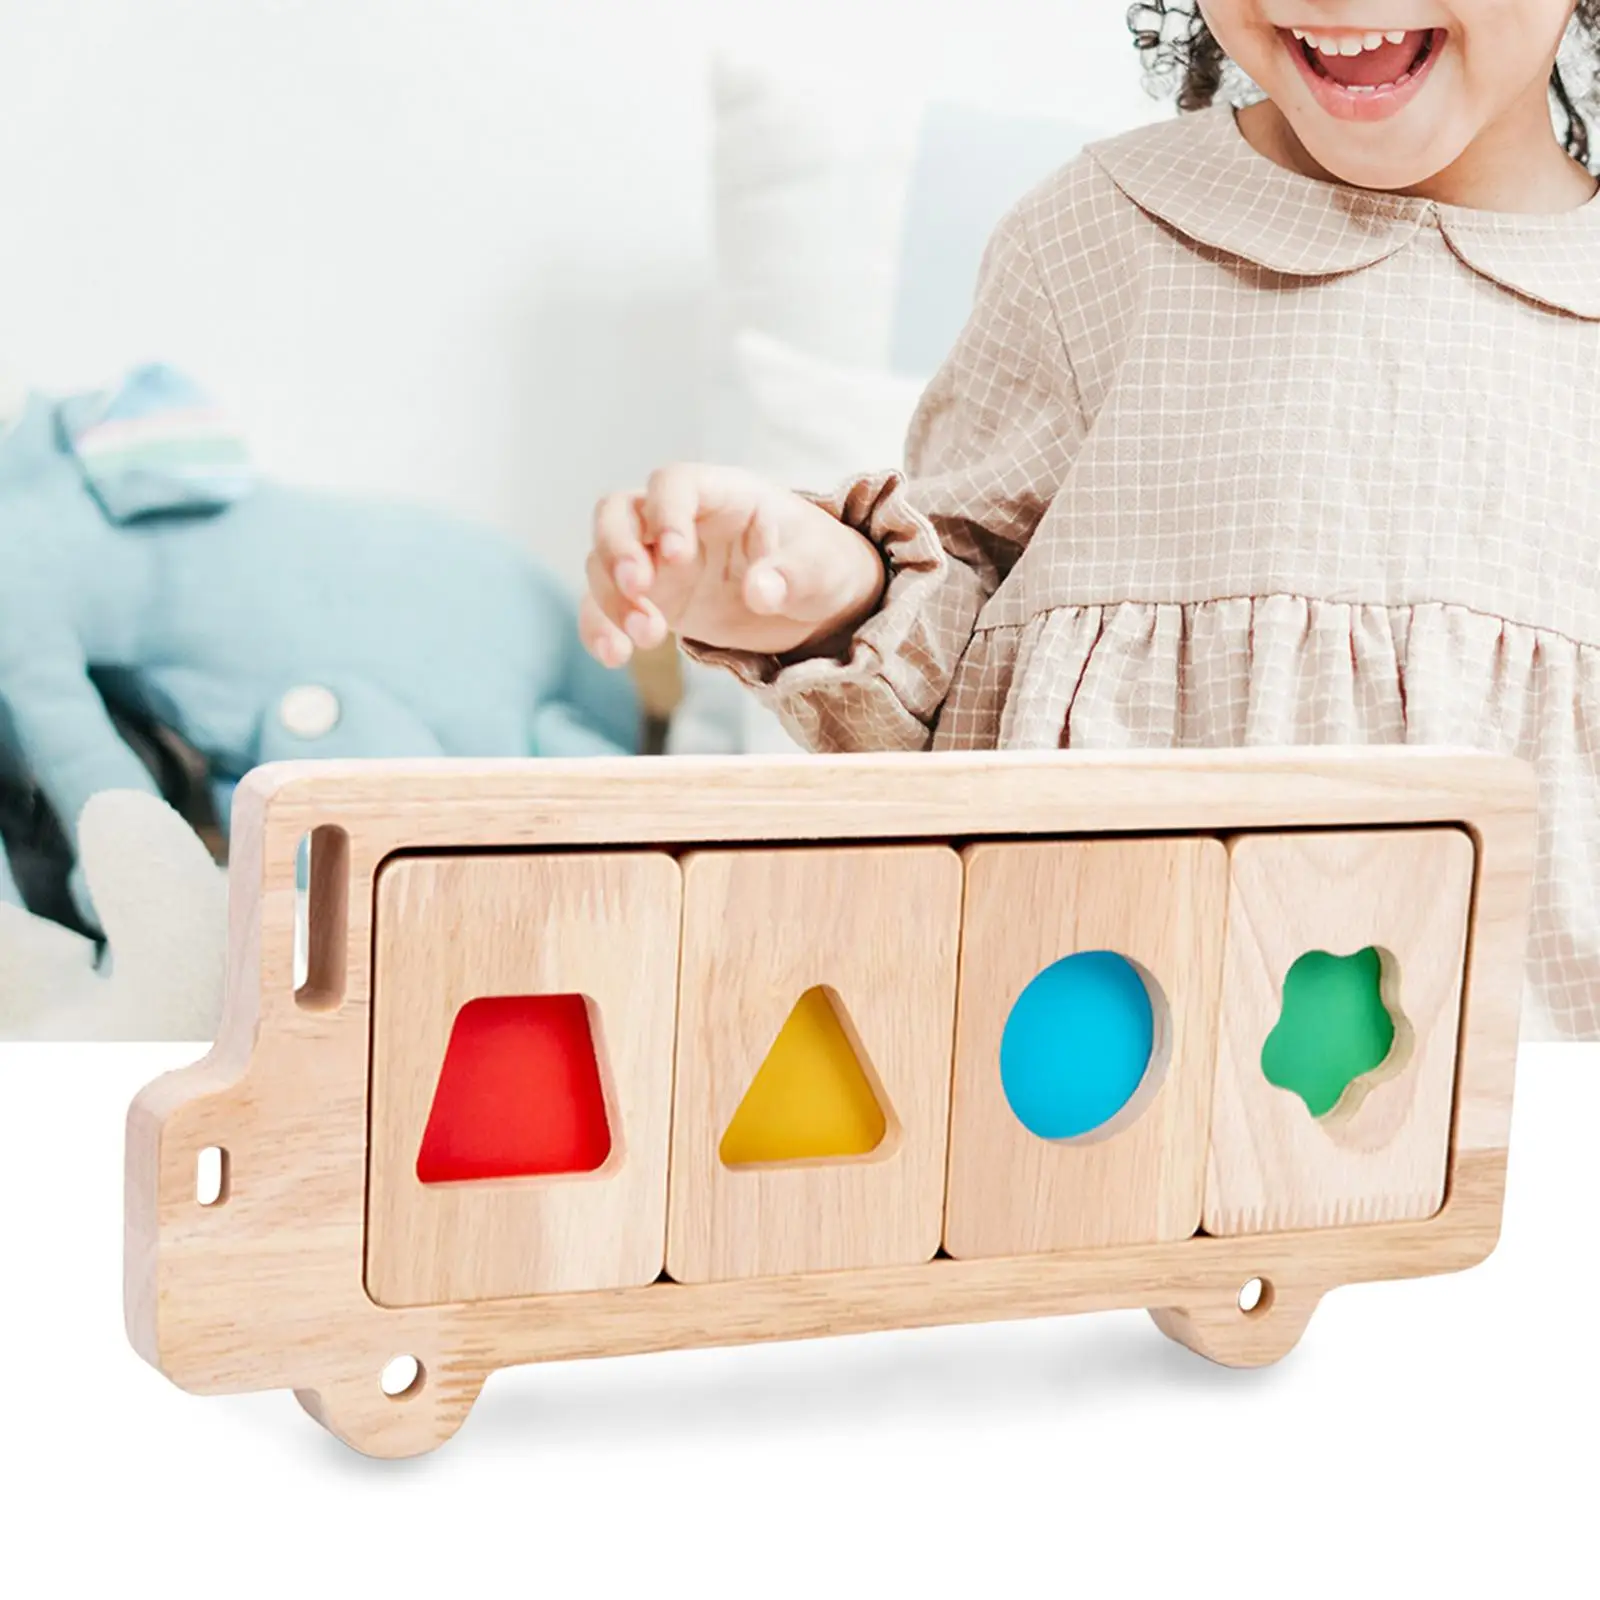 Wooden Puzzle Toy Educational Preschool Toy for Girl Children Birthday Gifts